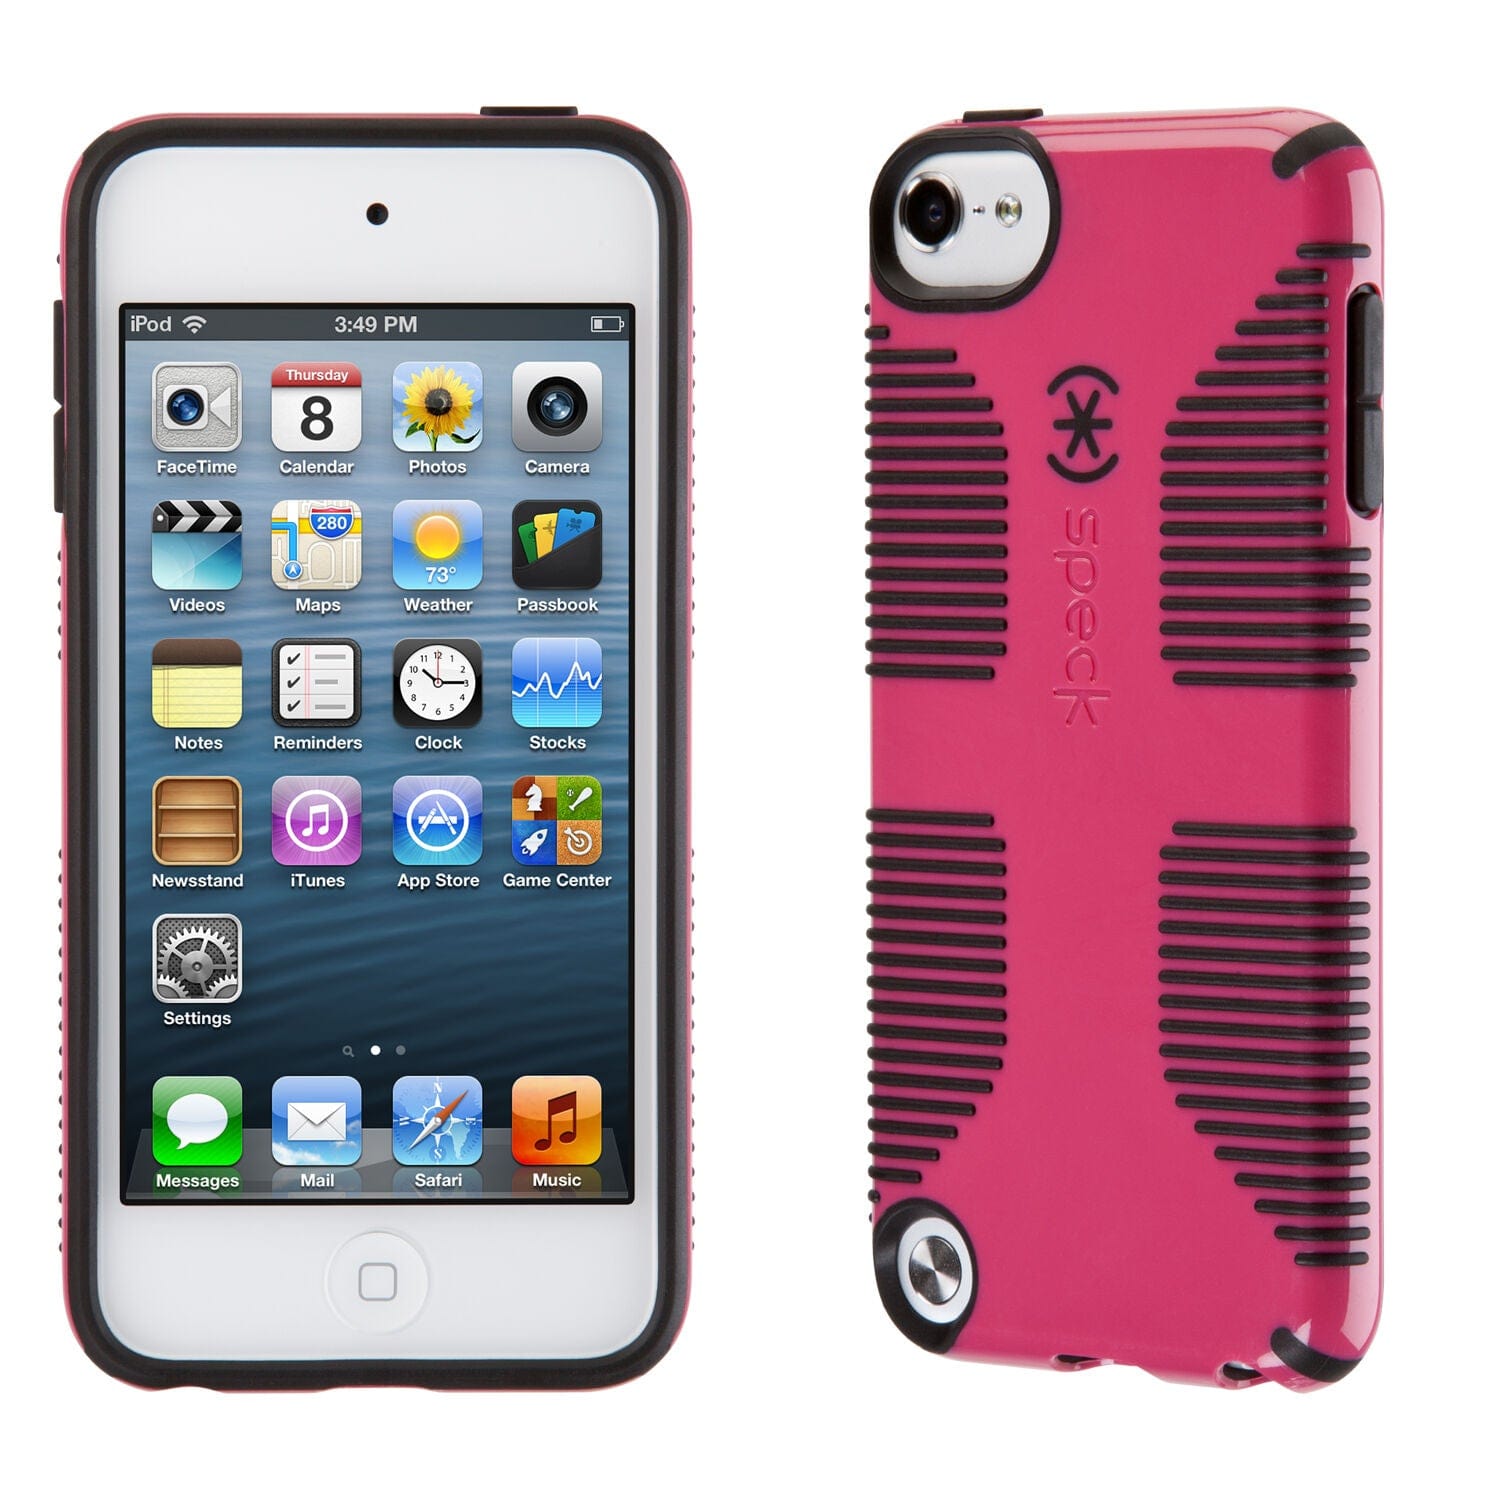 Speck CandyShell Grip iPod Touch 6G & 5G Cases Best iPod Touch 6G